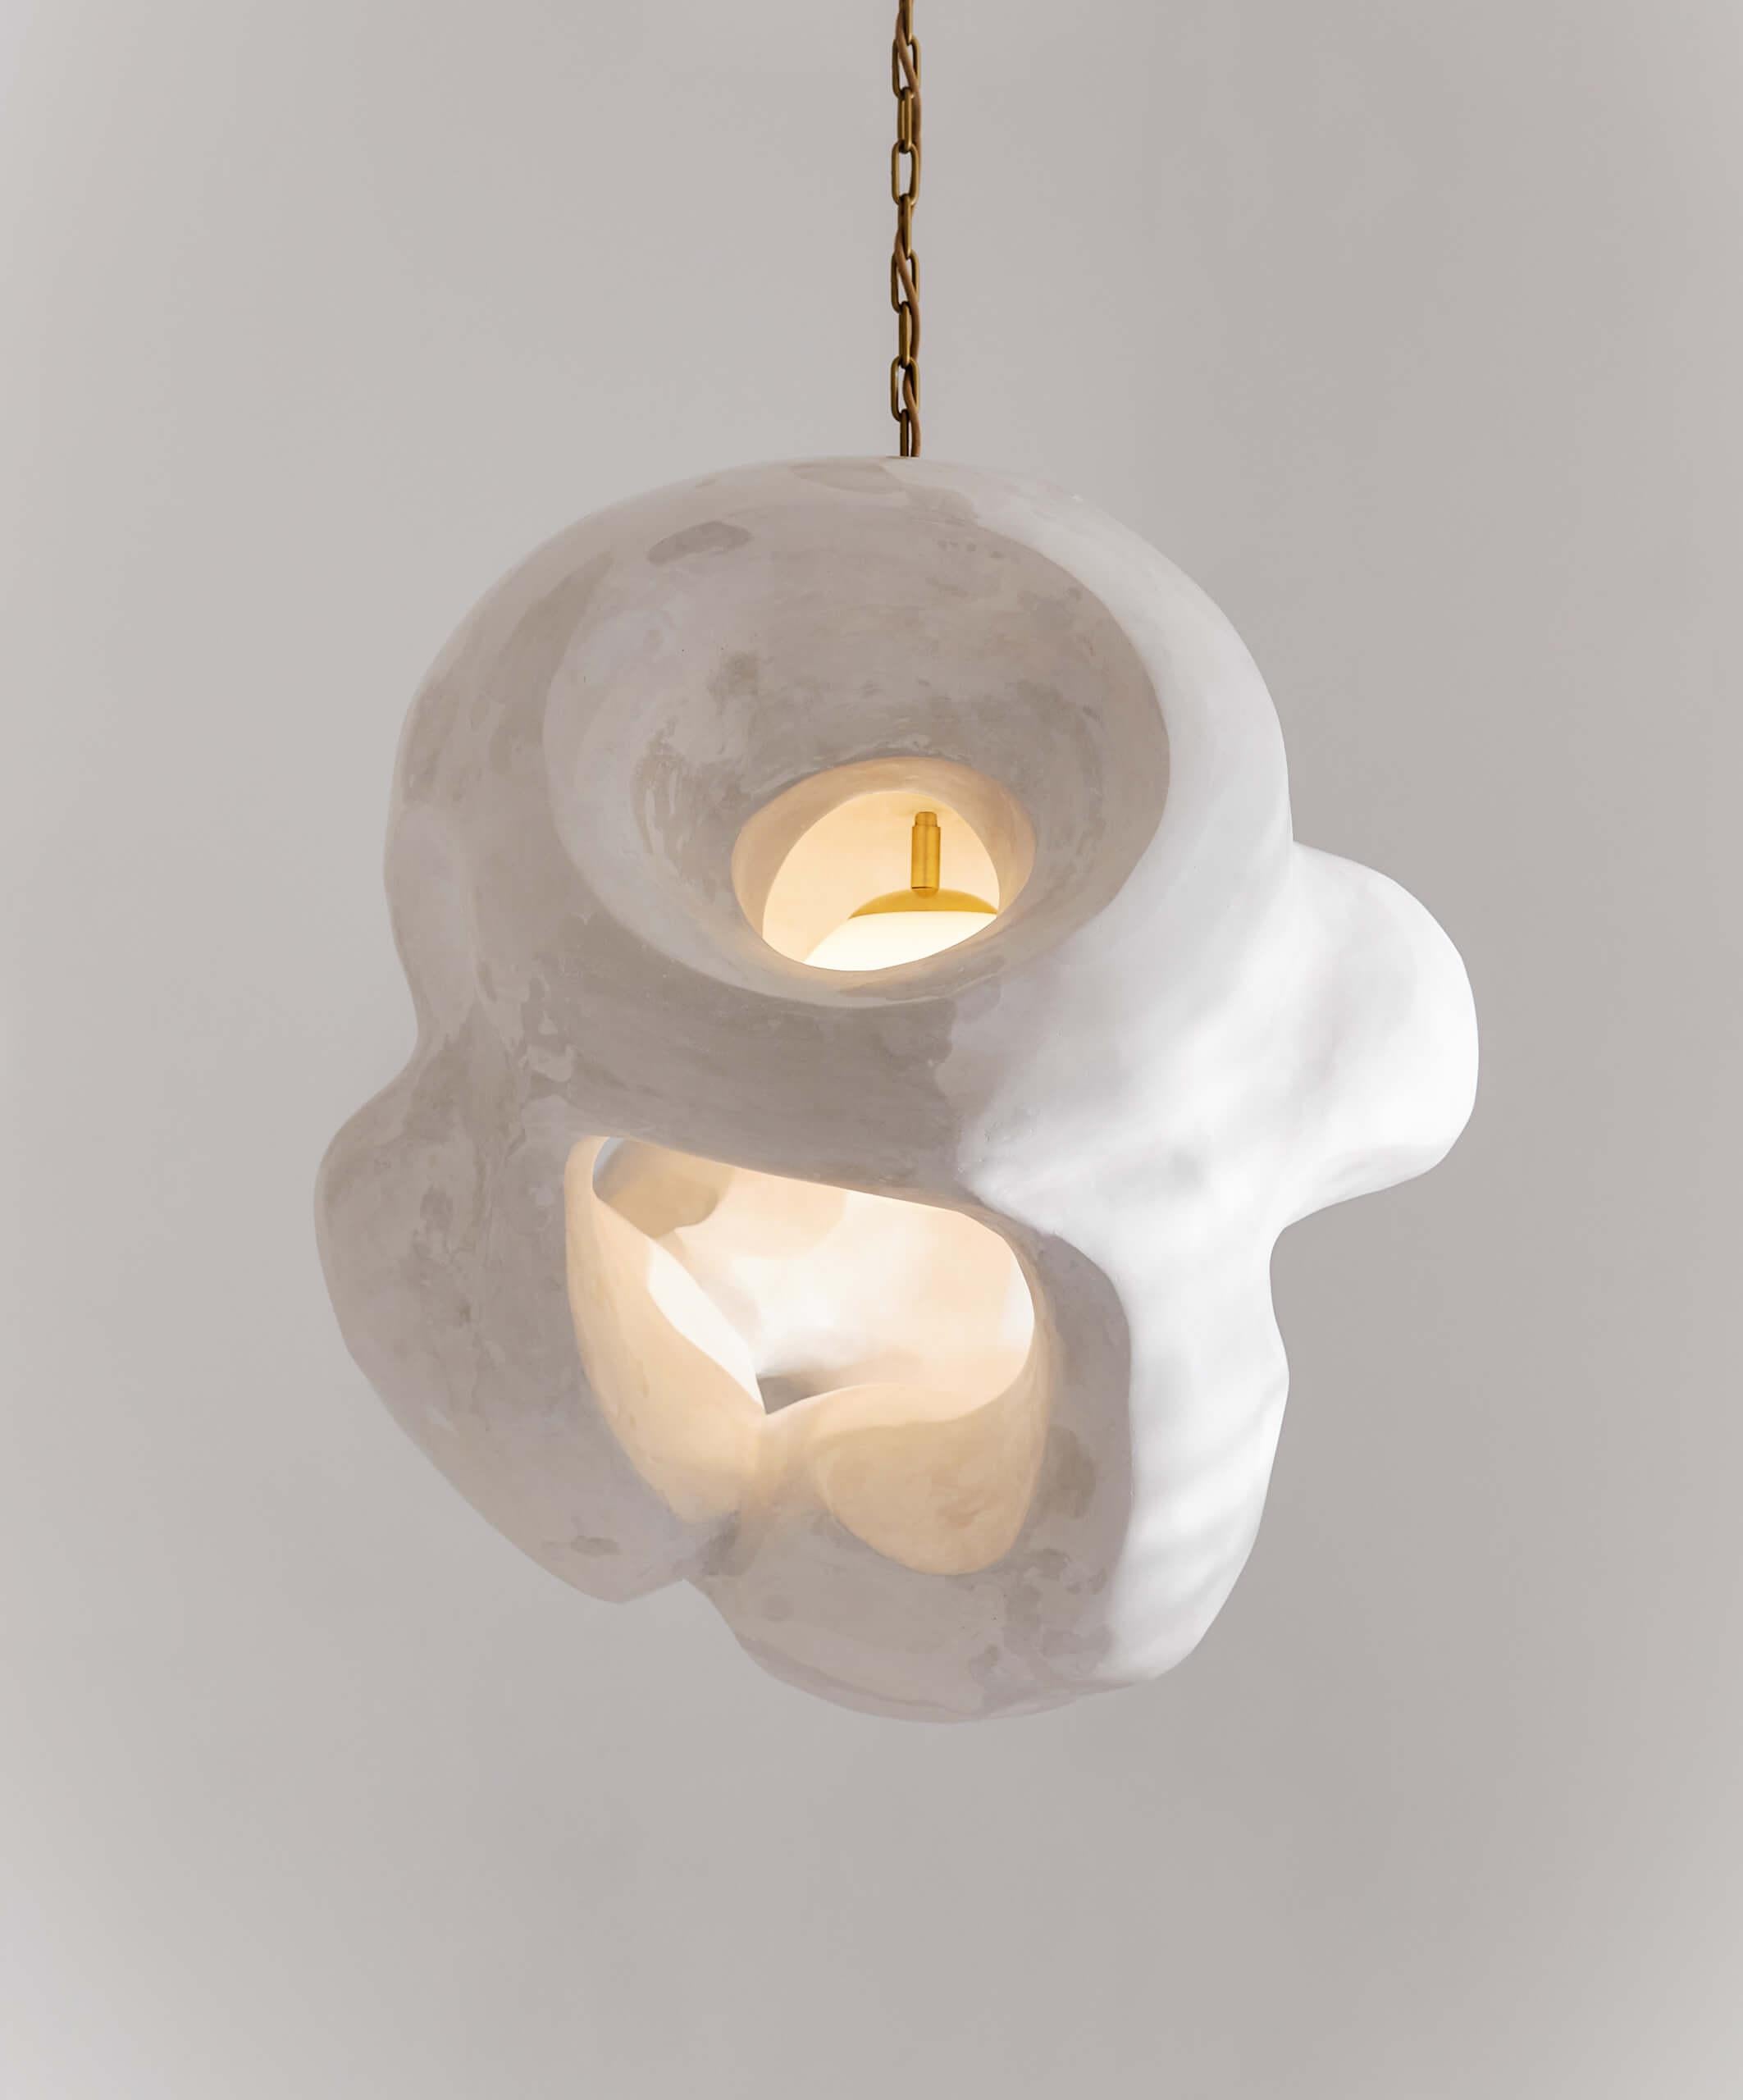 Ikigai Pendant Lamp by AOAO
Dimensions: W 75 x D 75 x H 85 cm
Materials: Gypsum.
Color: white.

The piece is hand-made in the Netherlands. Color options are available upon request. The size of the lamp can be customized. Please contact us.
The lamp